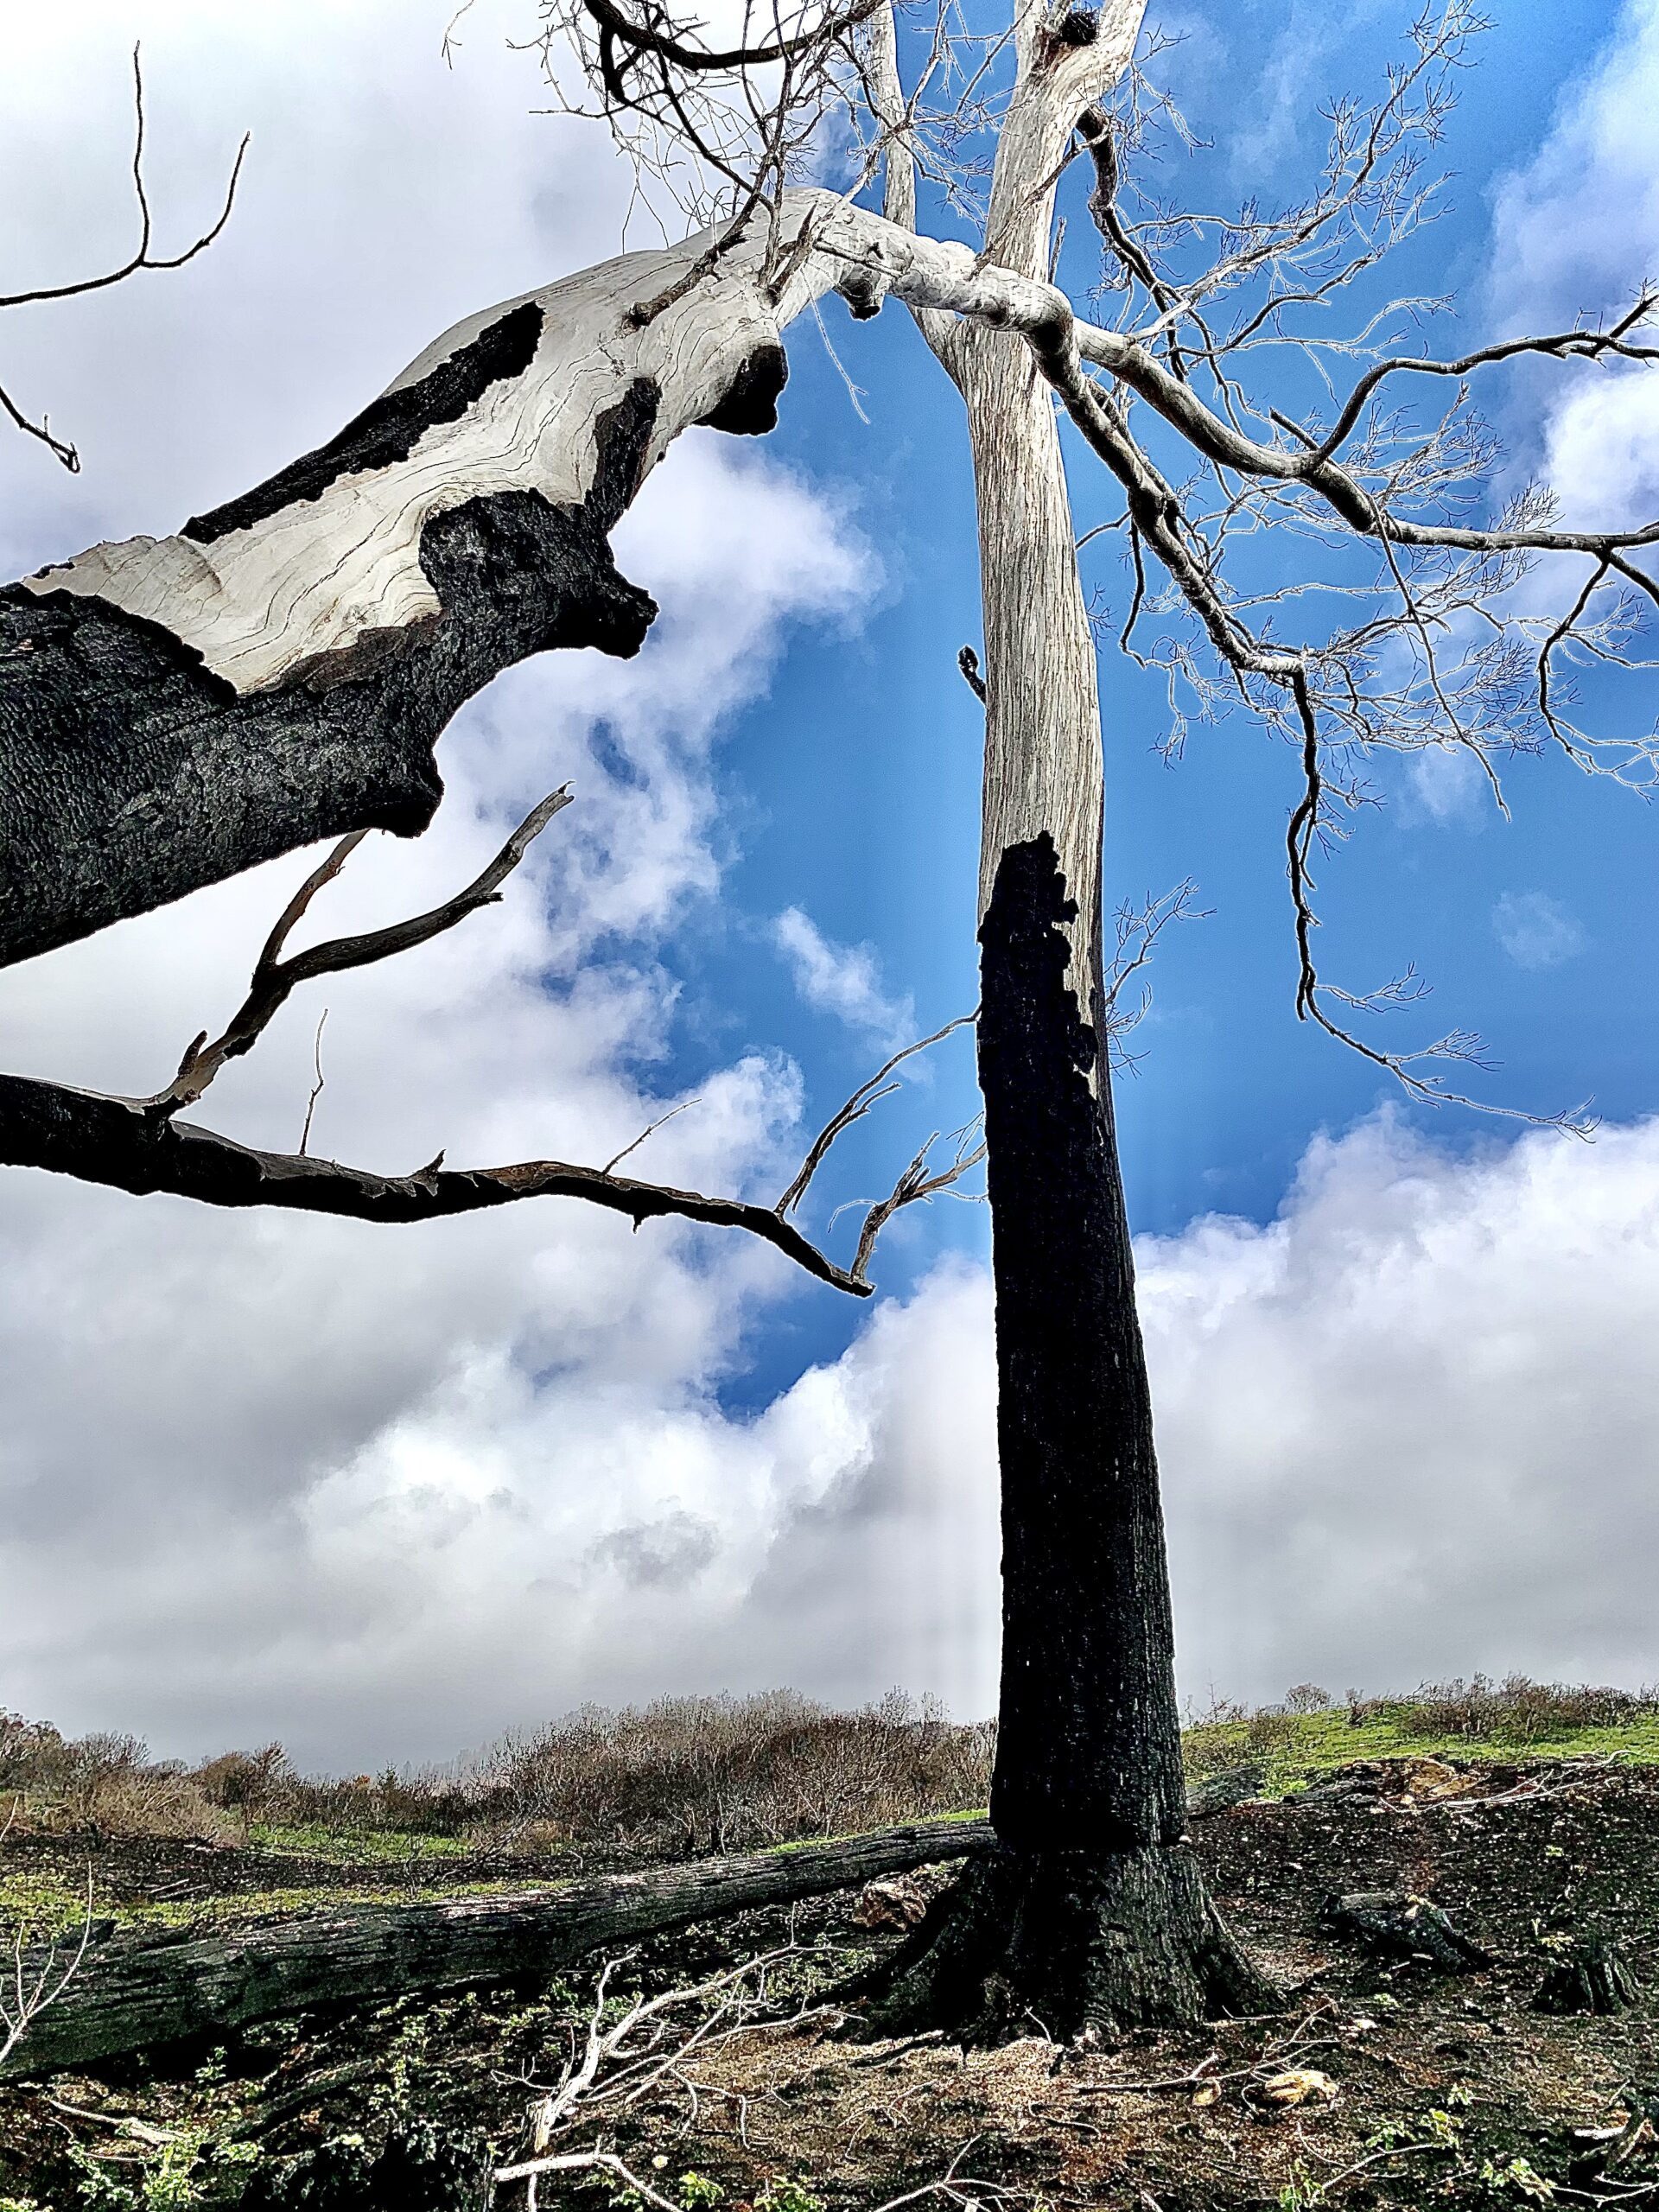 Two dead trees in a field with a blue sky.